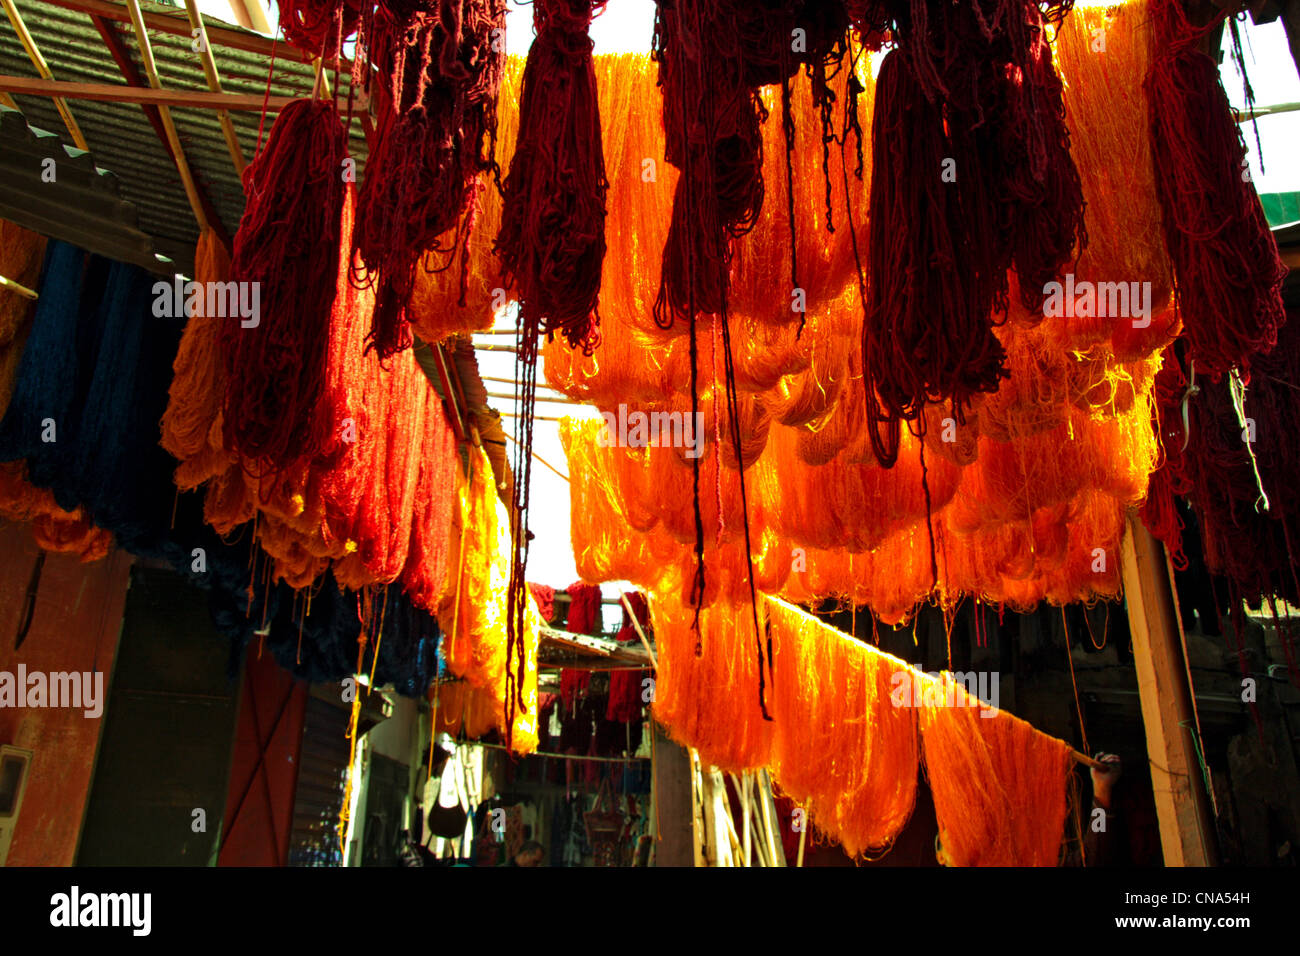 Sheaves of freshly dyed red and yellow wool hang drying in the Dyers souk/Souq des Sebbaghine in the medina, Marrakech, Morocco Stock Photo